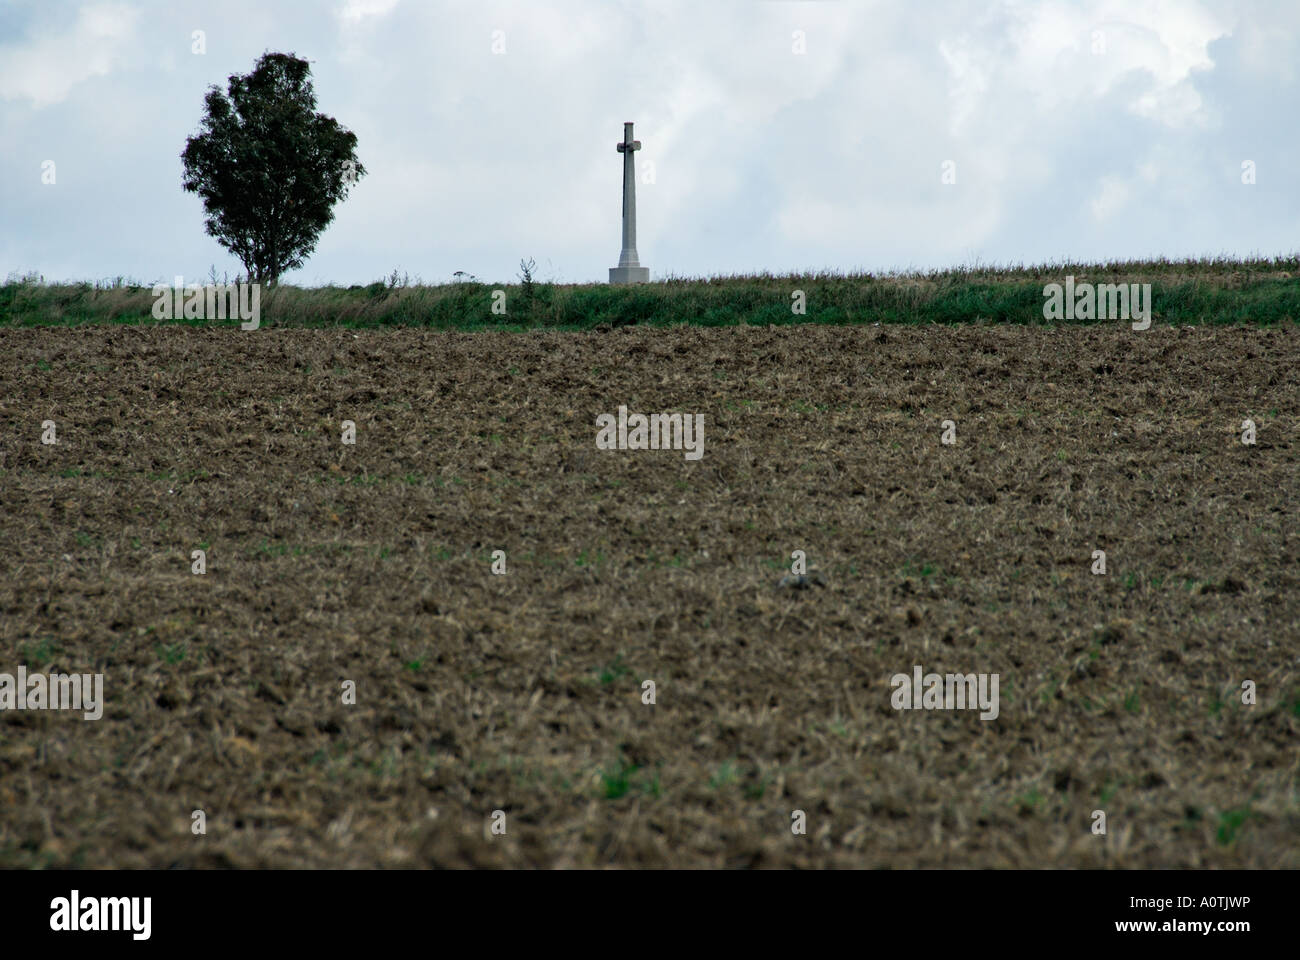 'Memorial cross in a field, 'Authuille Wood', Thiepval, northern France' Stock Photo